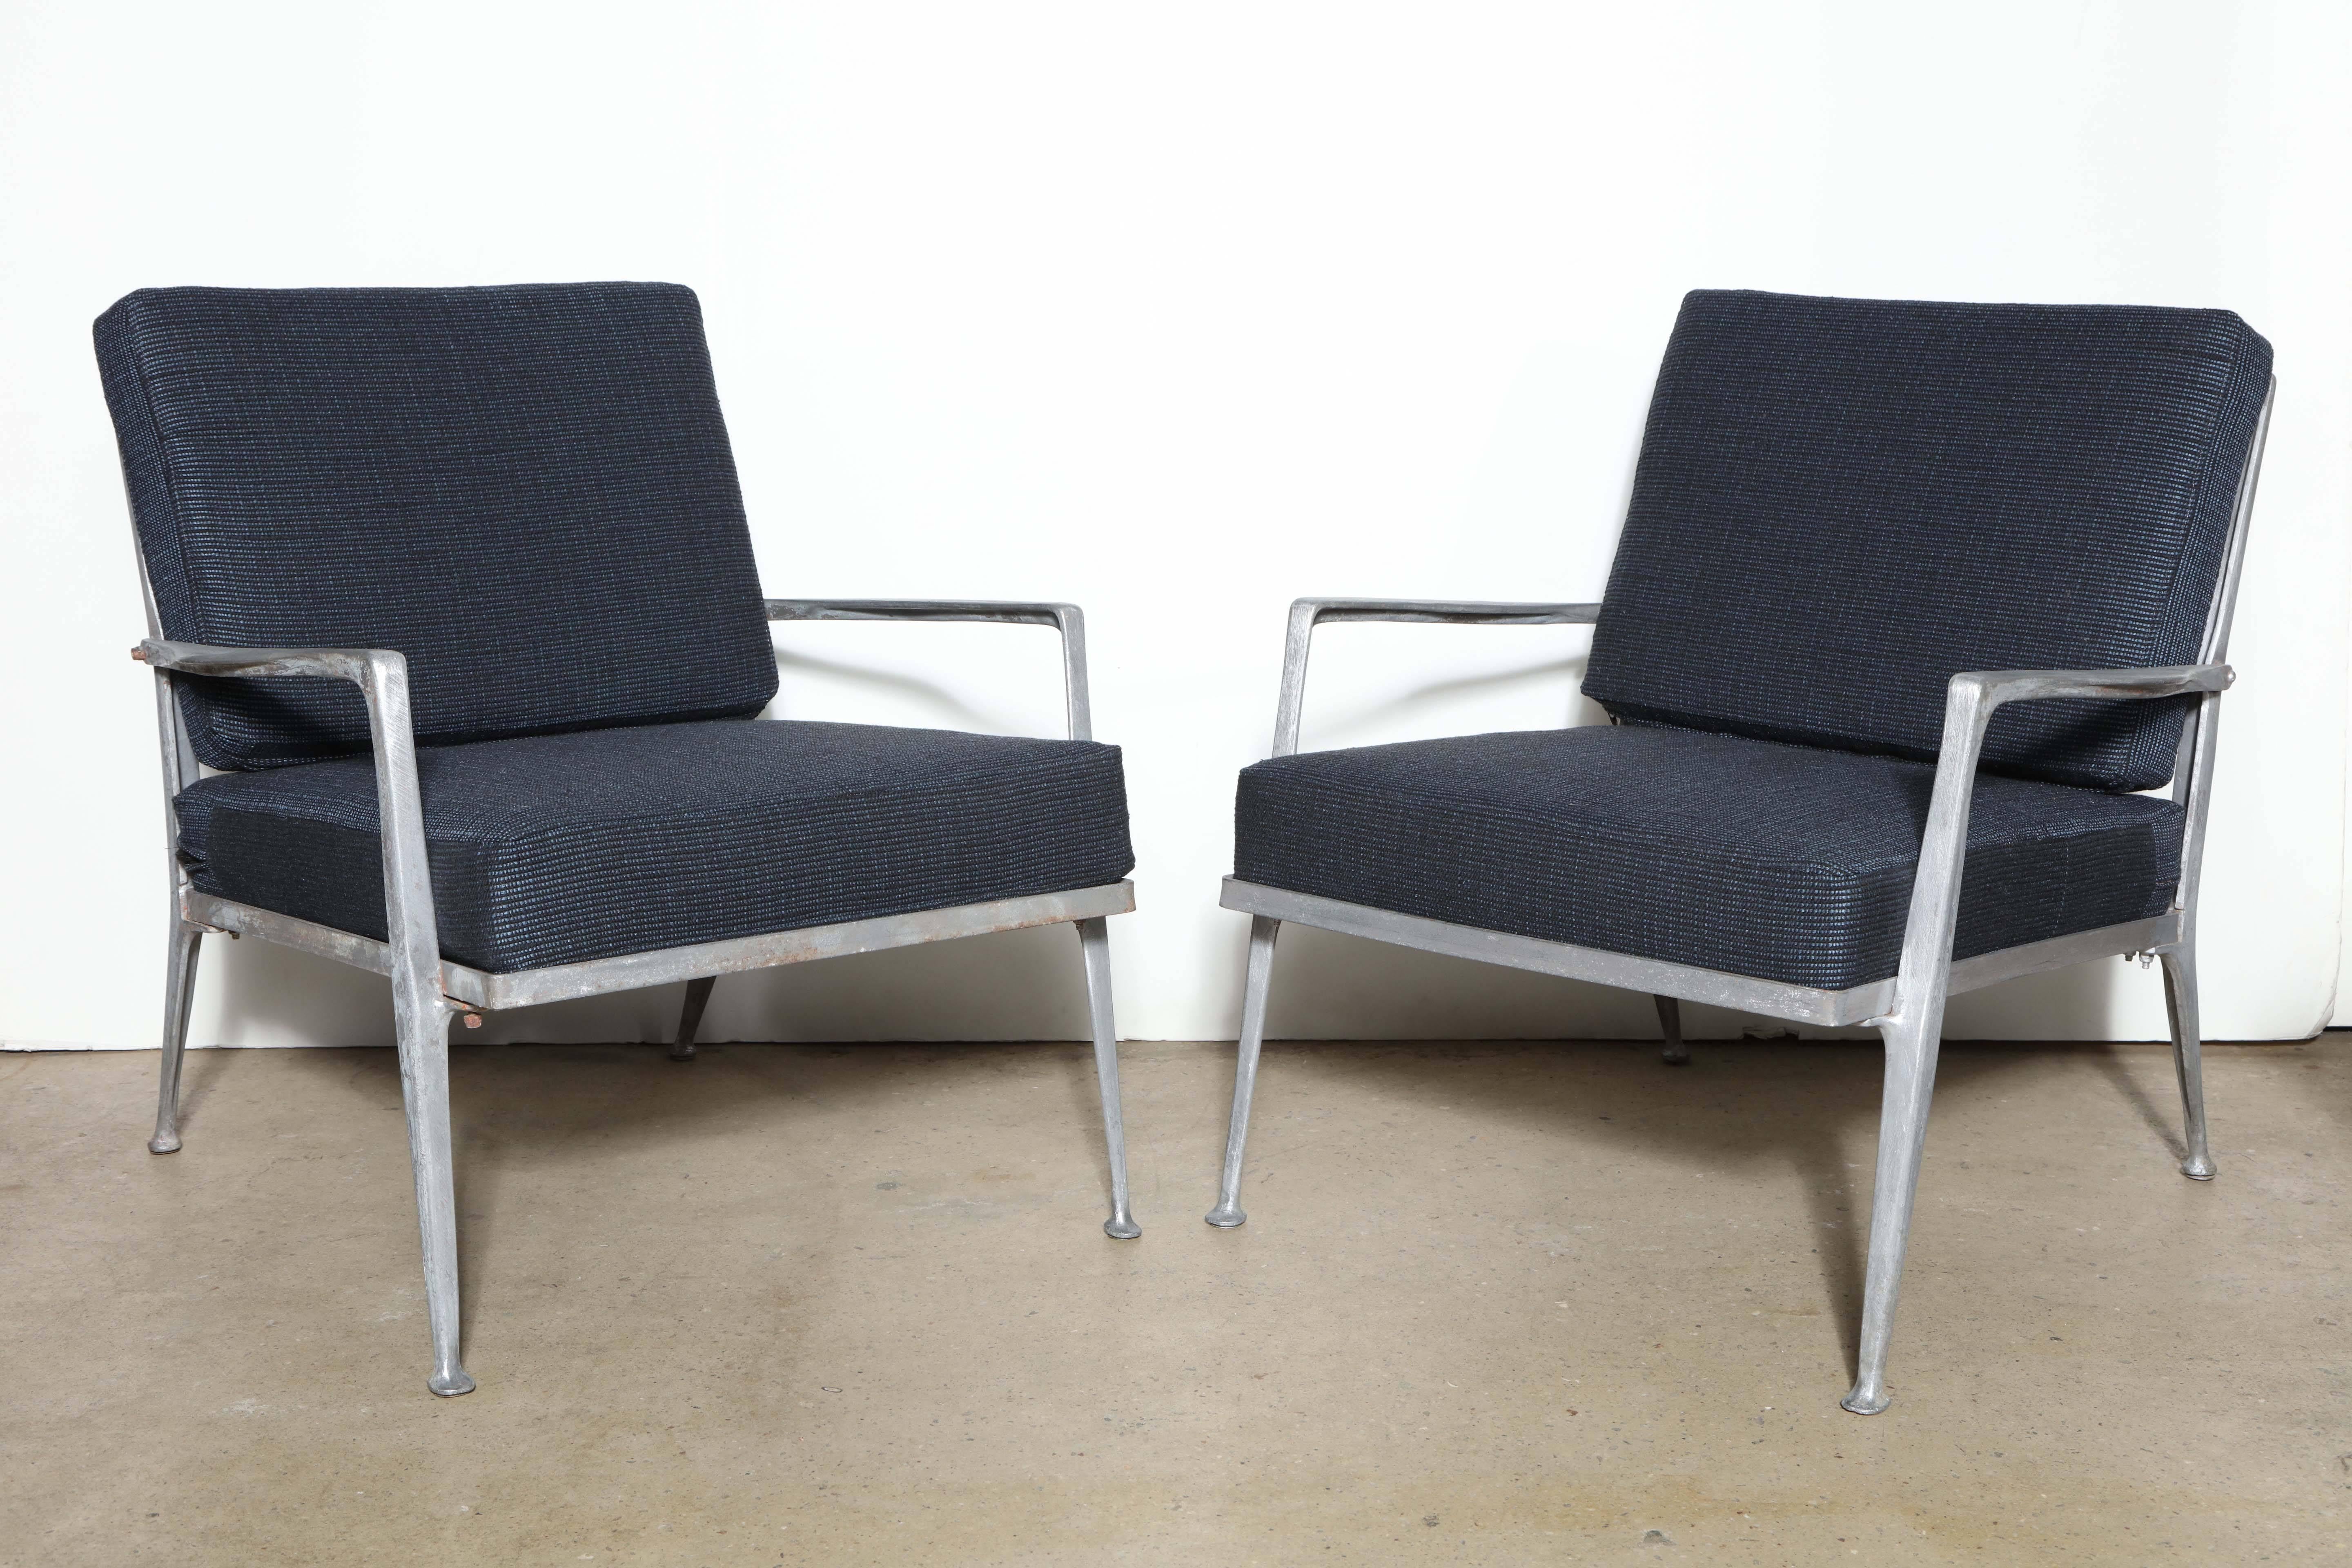 Pair of sculptural American midcentury Molla Furniture Co. Solid cast aluminum lounge chairs. Featuring a solid cast aluminum framework, cross frame rear construction and four lightweight cushions, newly upholstered in a dark blue and black woven